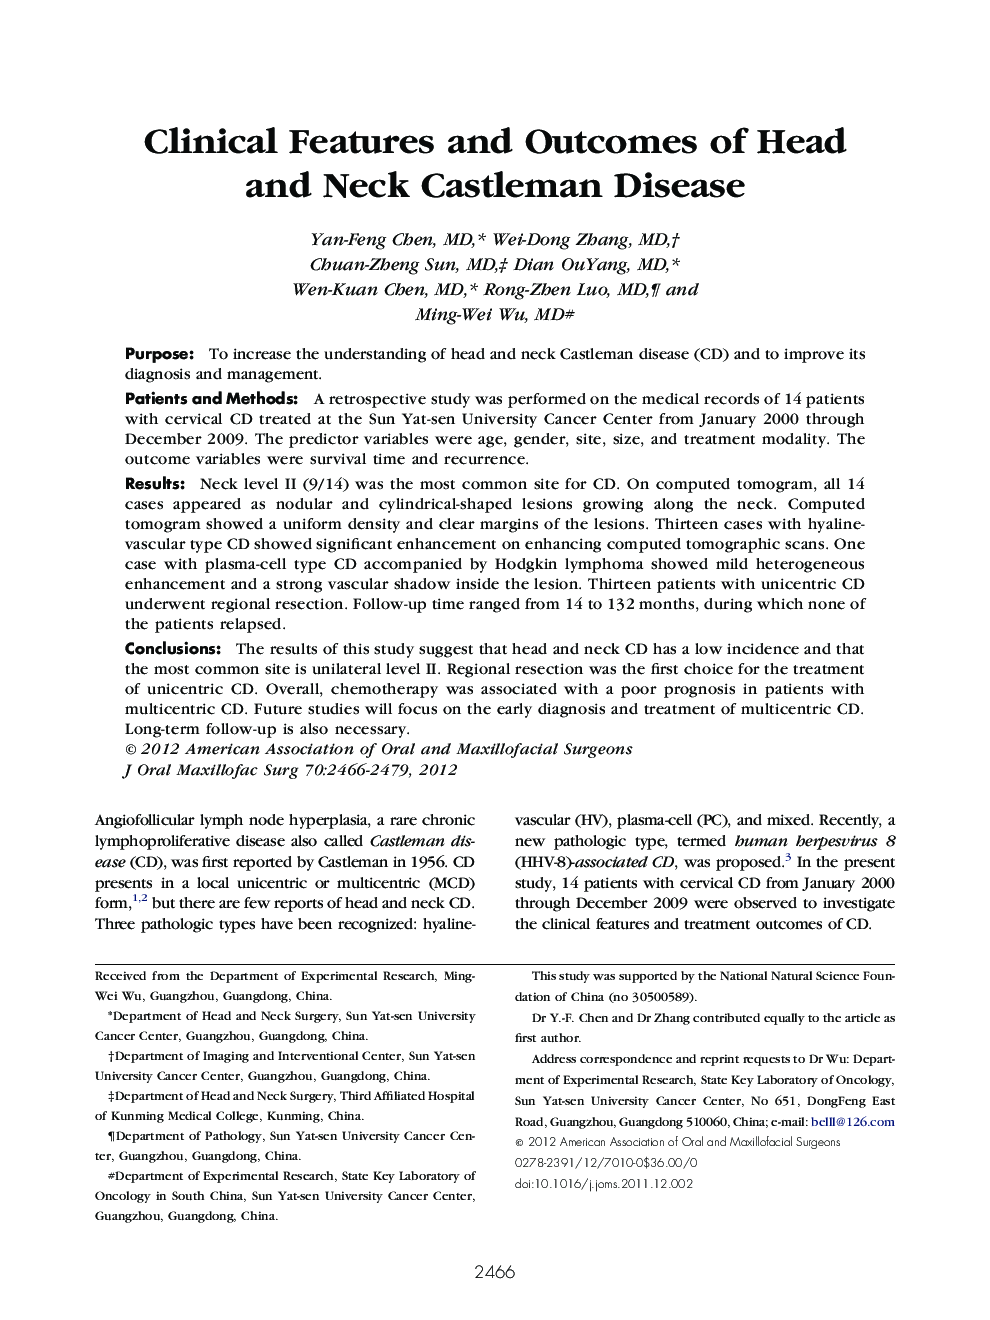 Clinical Features and Outcomes of Head and Neck Castleman Disease 